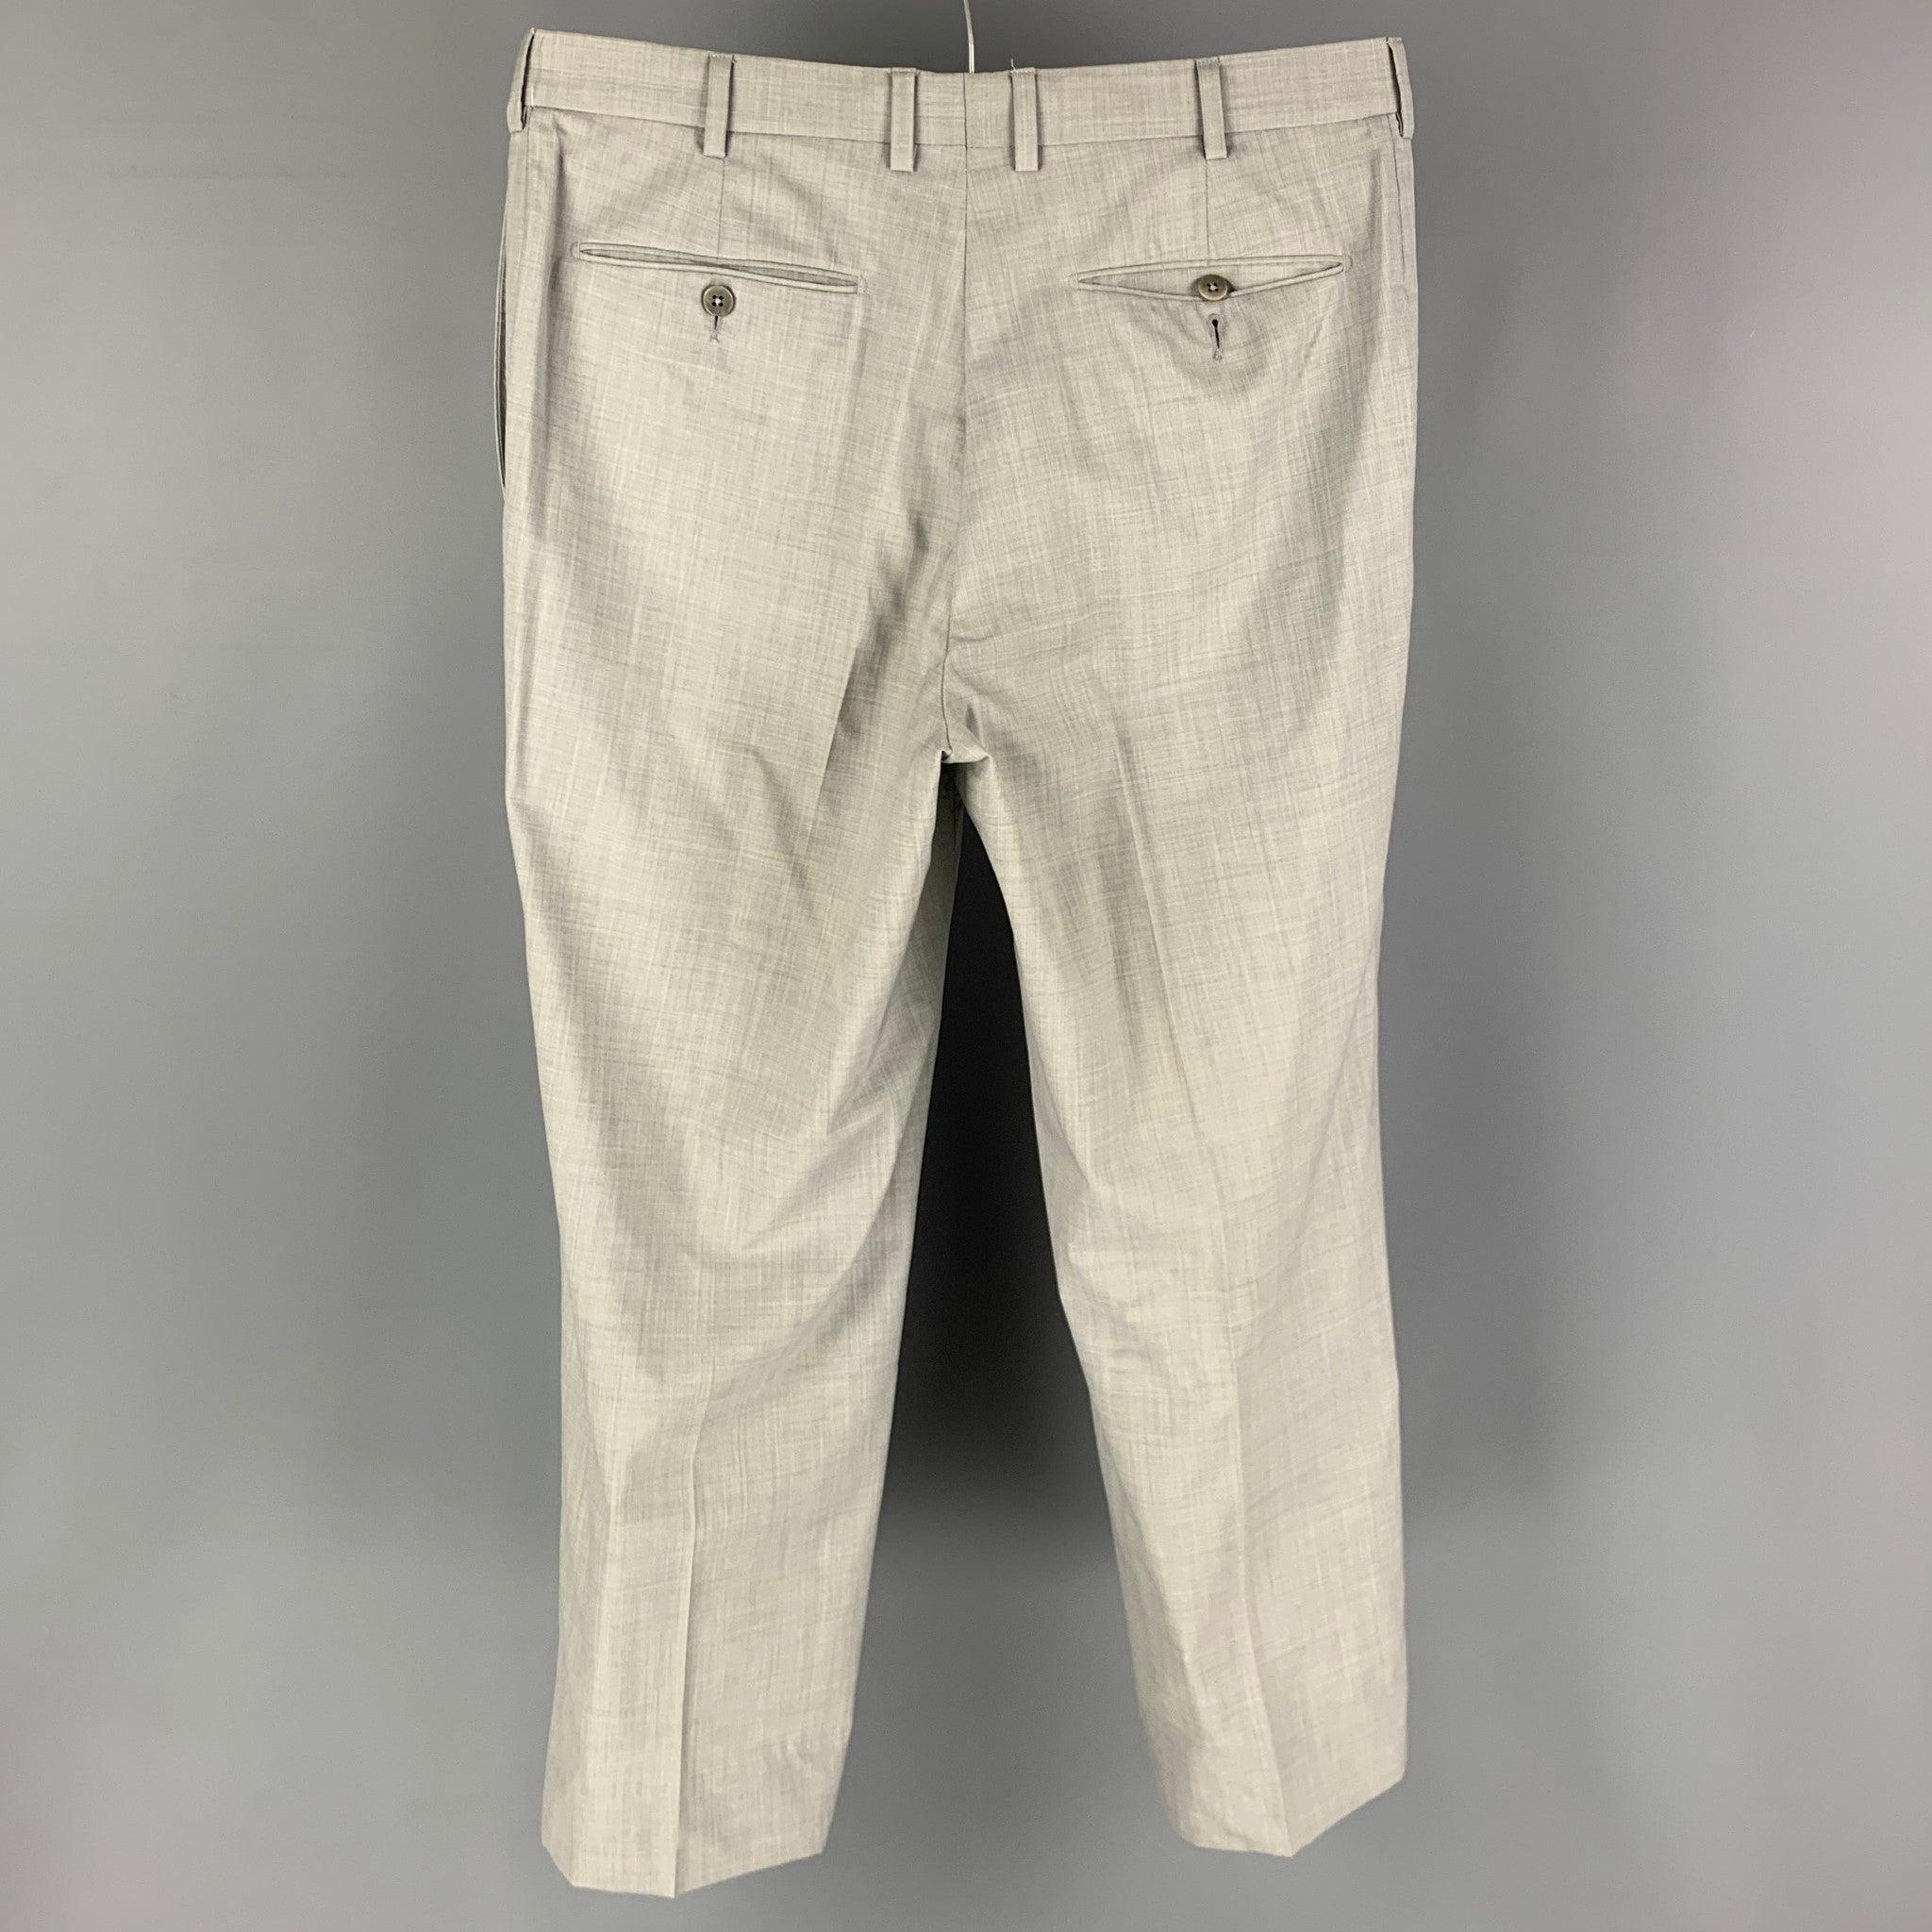 ERMENEGILDO ZEGNA pants comes in a light grey wool 
featuring a flat front and a zip fly closure.
Good
Pre-Owned Condition. Light discoloration at front. As-is. 

Marked:  36 R 

Measurements: 
 Waist: 34 inches Rise: 11 inches Inseam: 28 inches Leg